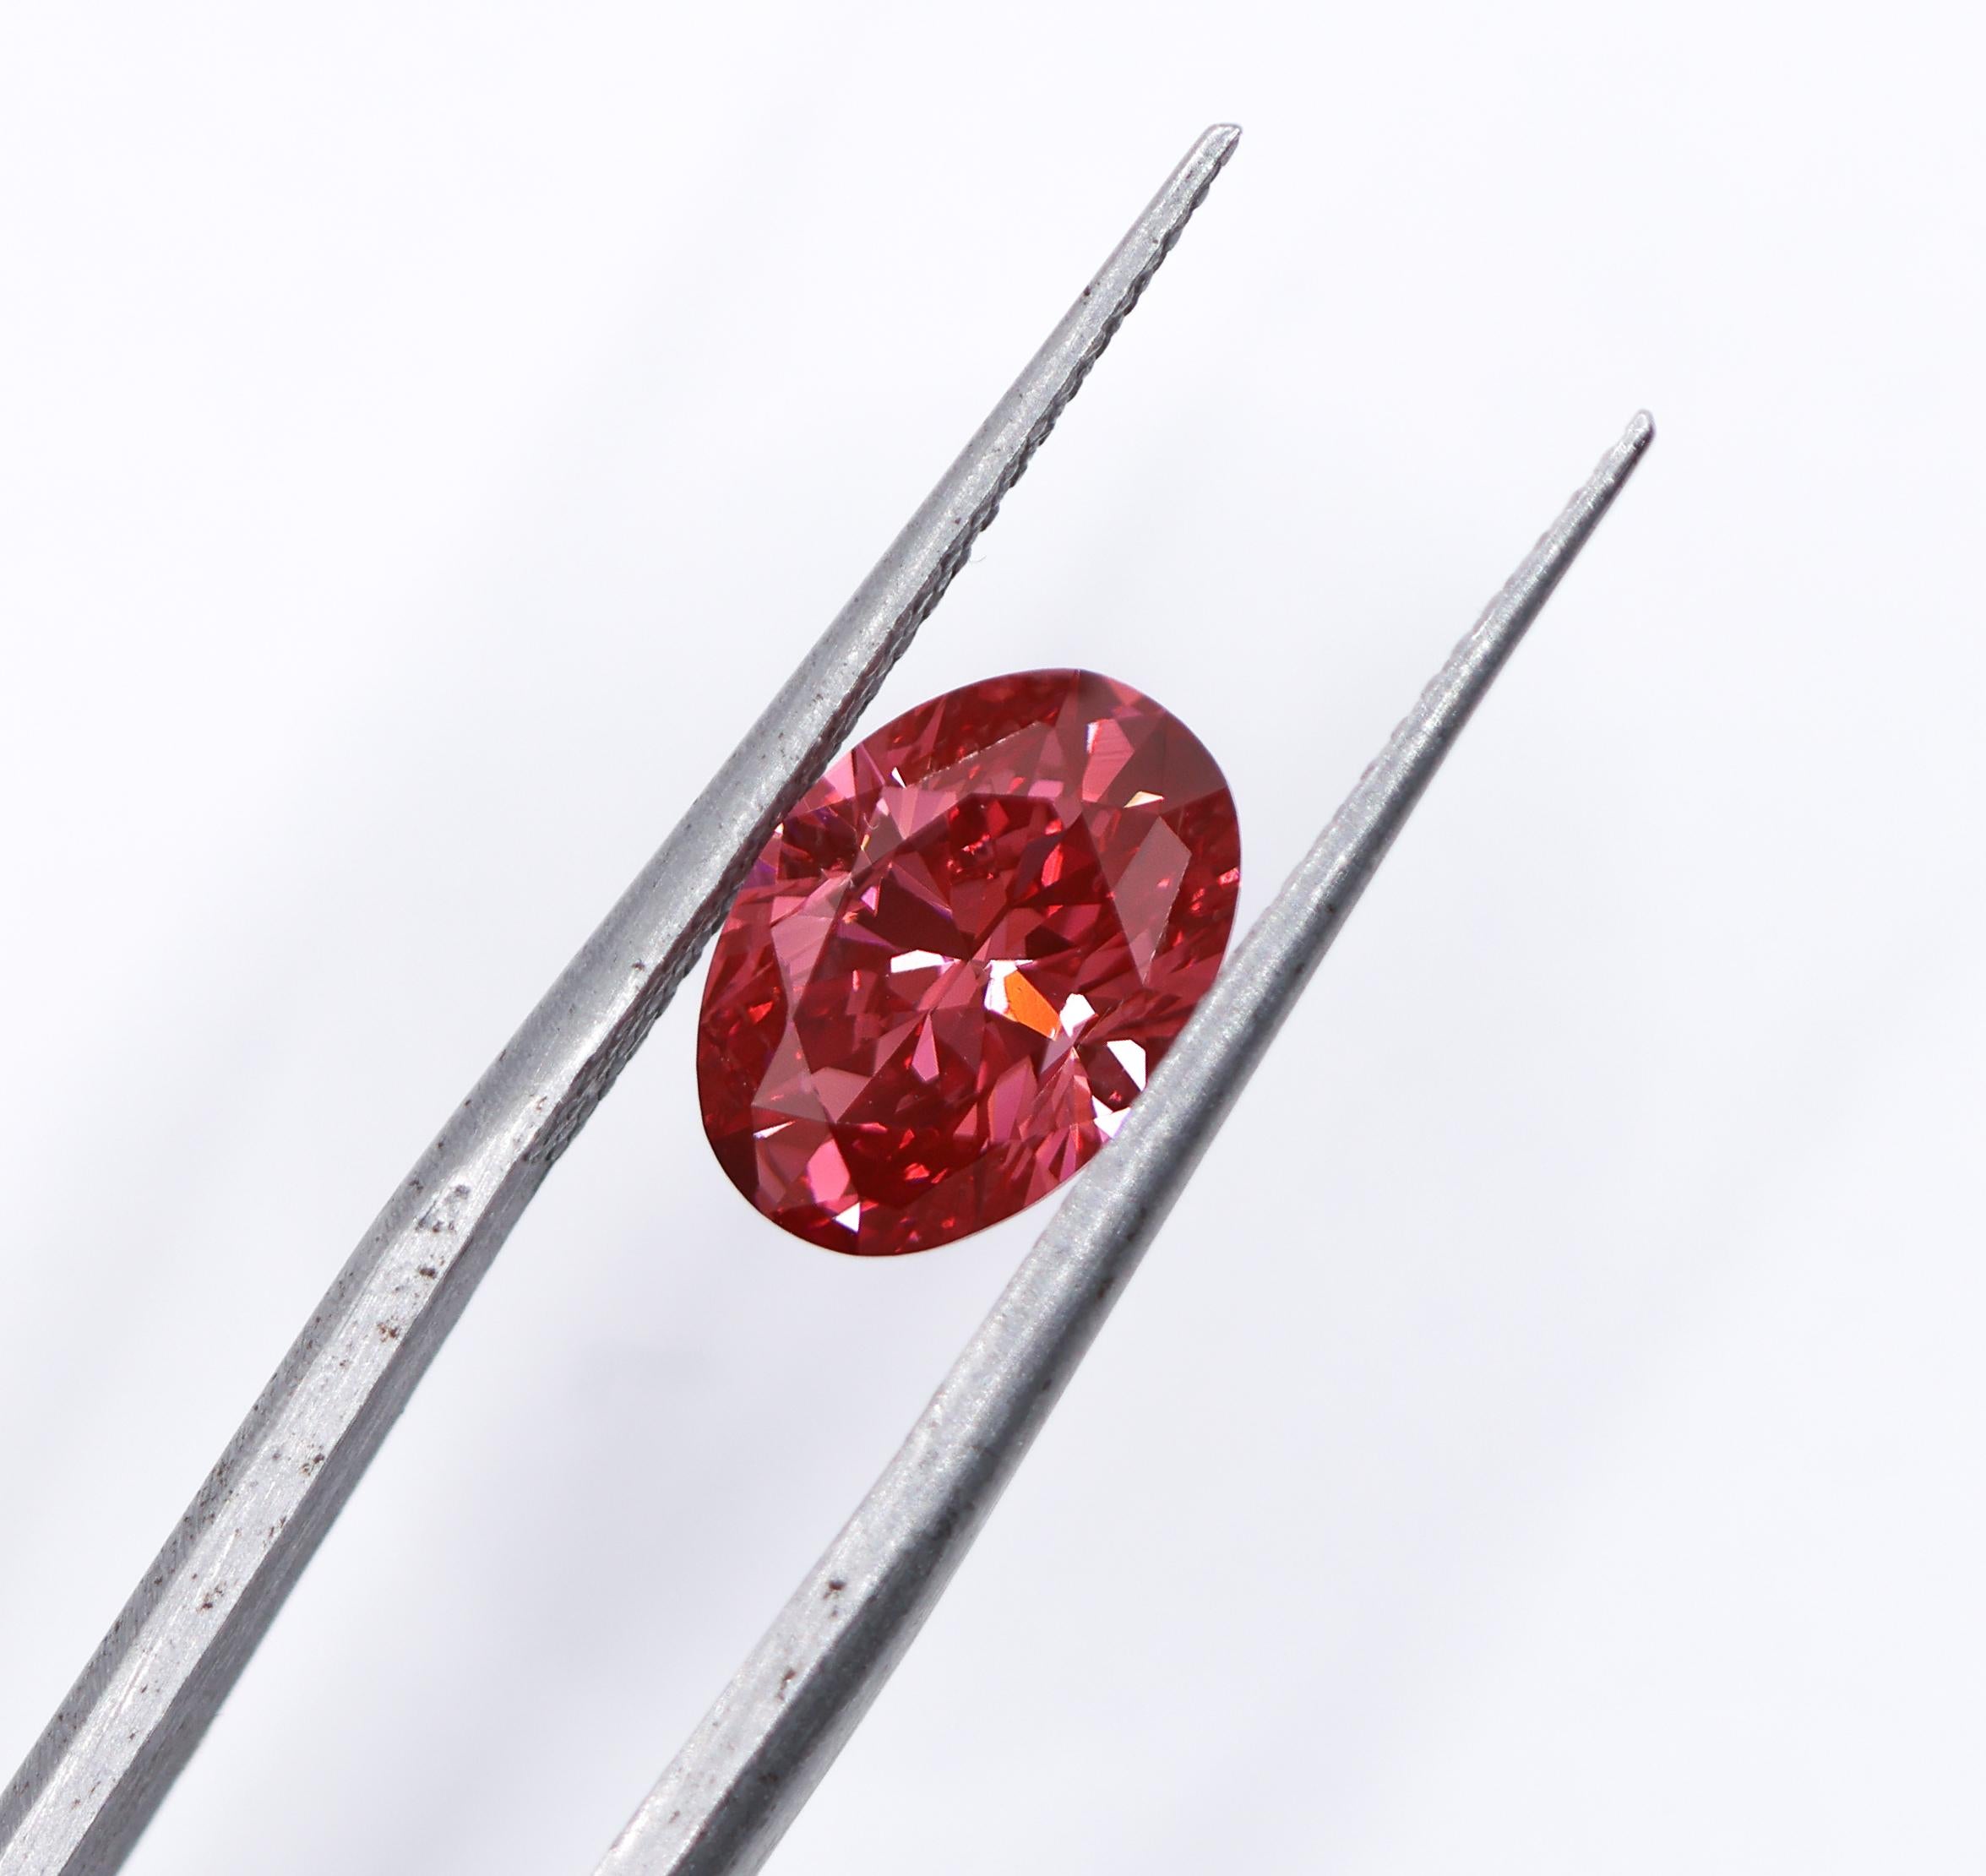 We are thrilled to bring you this absolutely gorgeous pink natural, earth-mined diamond! This diamond is HPHT treated, giving it a stunning Fancy Deep Pink color. A fabulous size for an engagement ring or statement piece that is sure to turn heads.